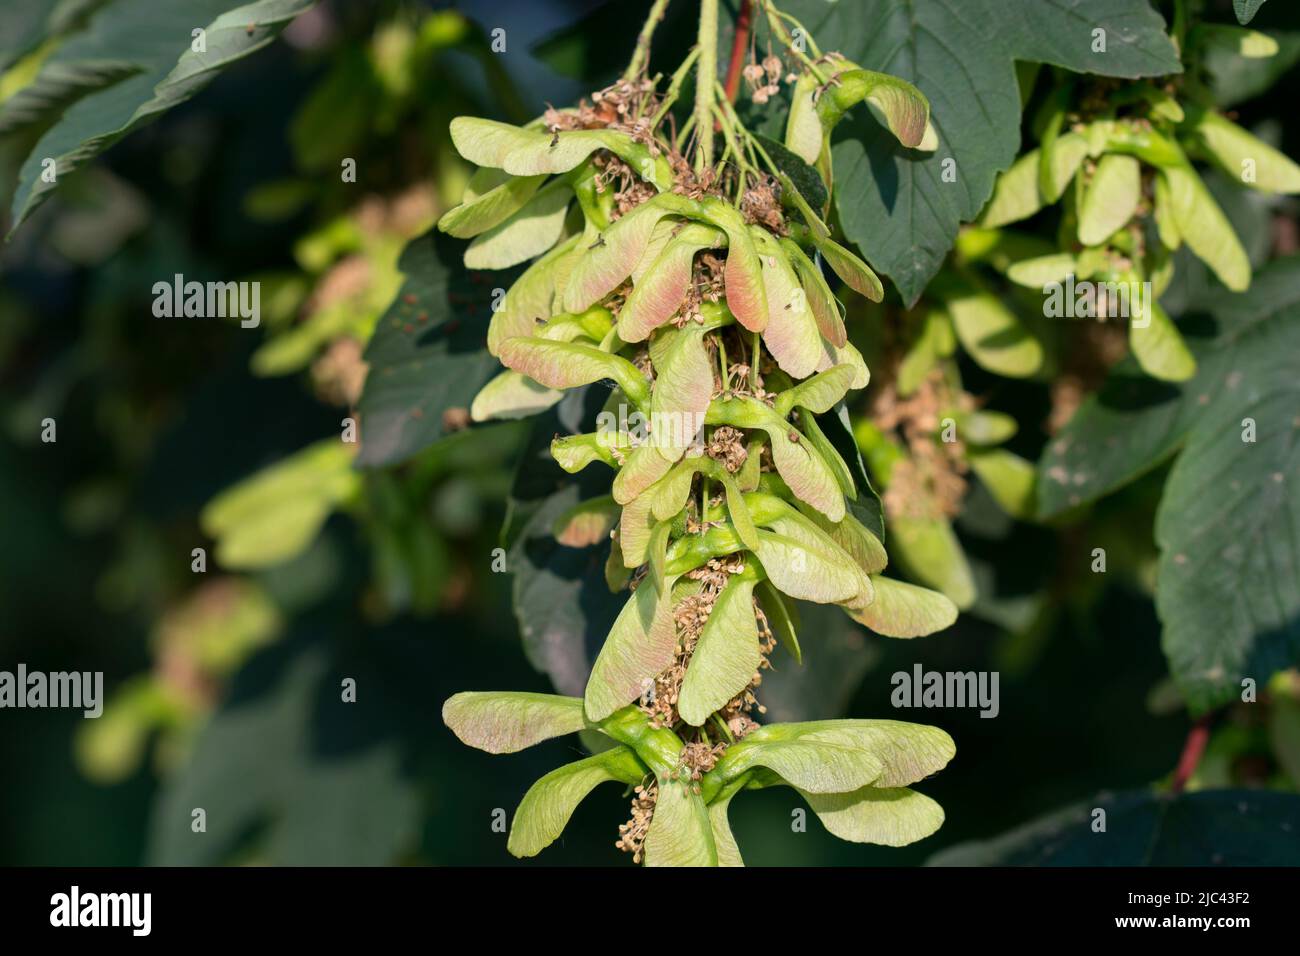 Acer pseudoplatanus, sycamore fruits and leaves closeup selective focus Stock Photo